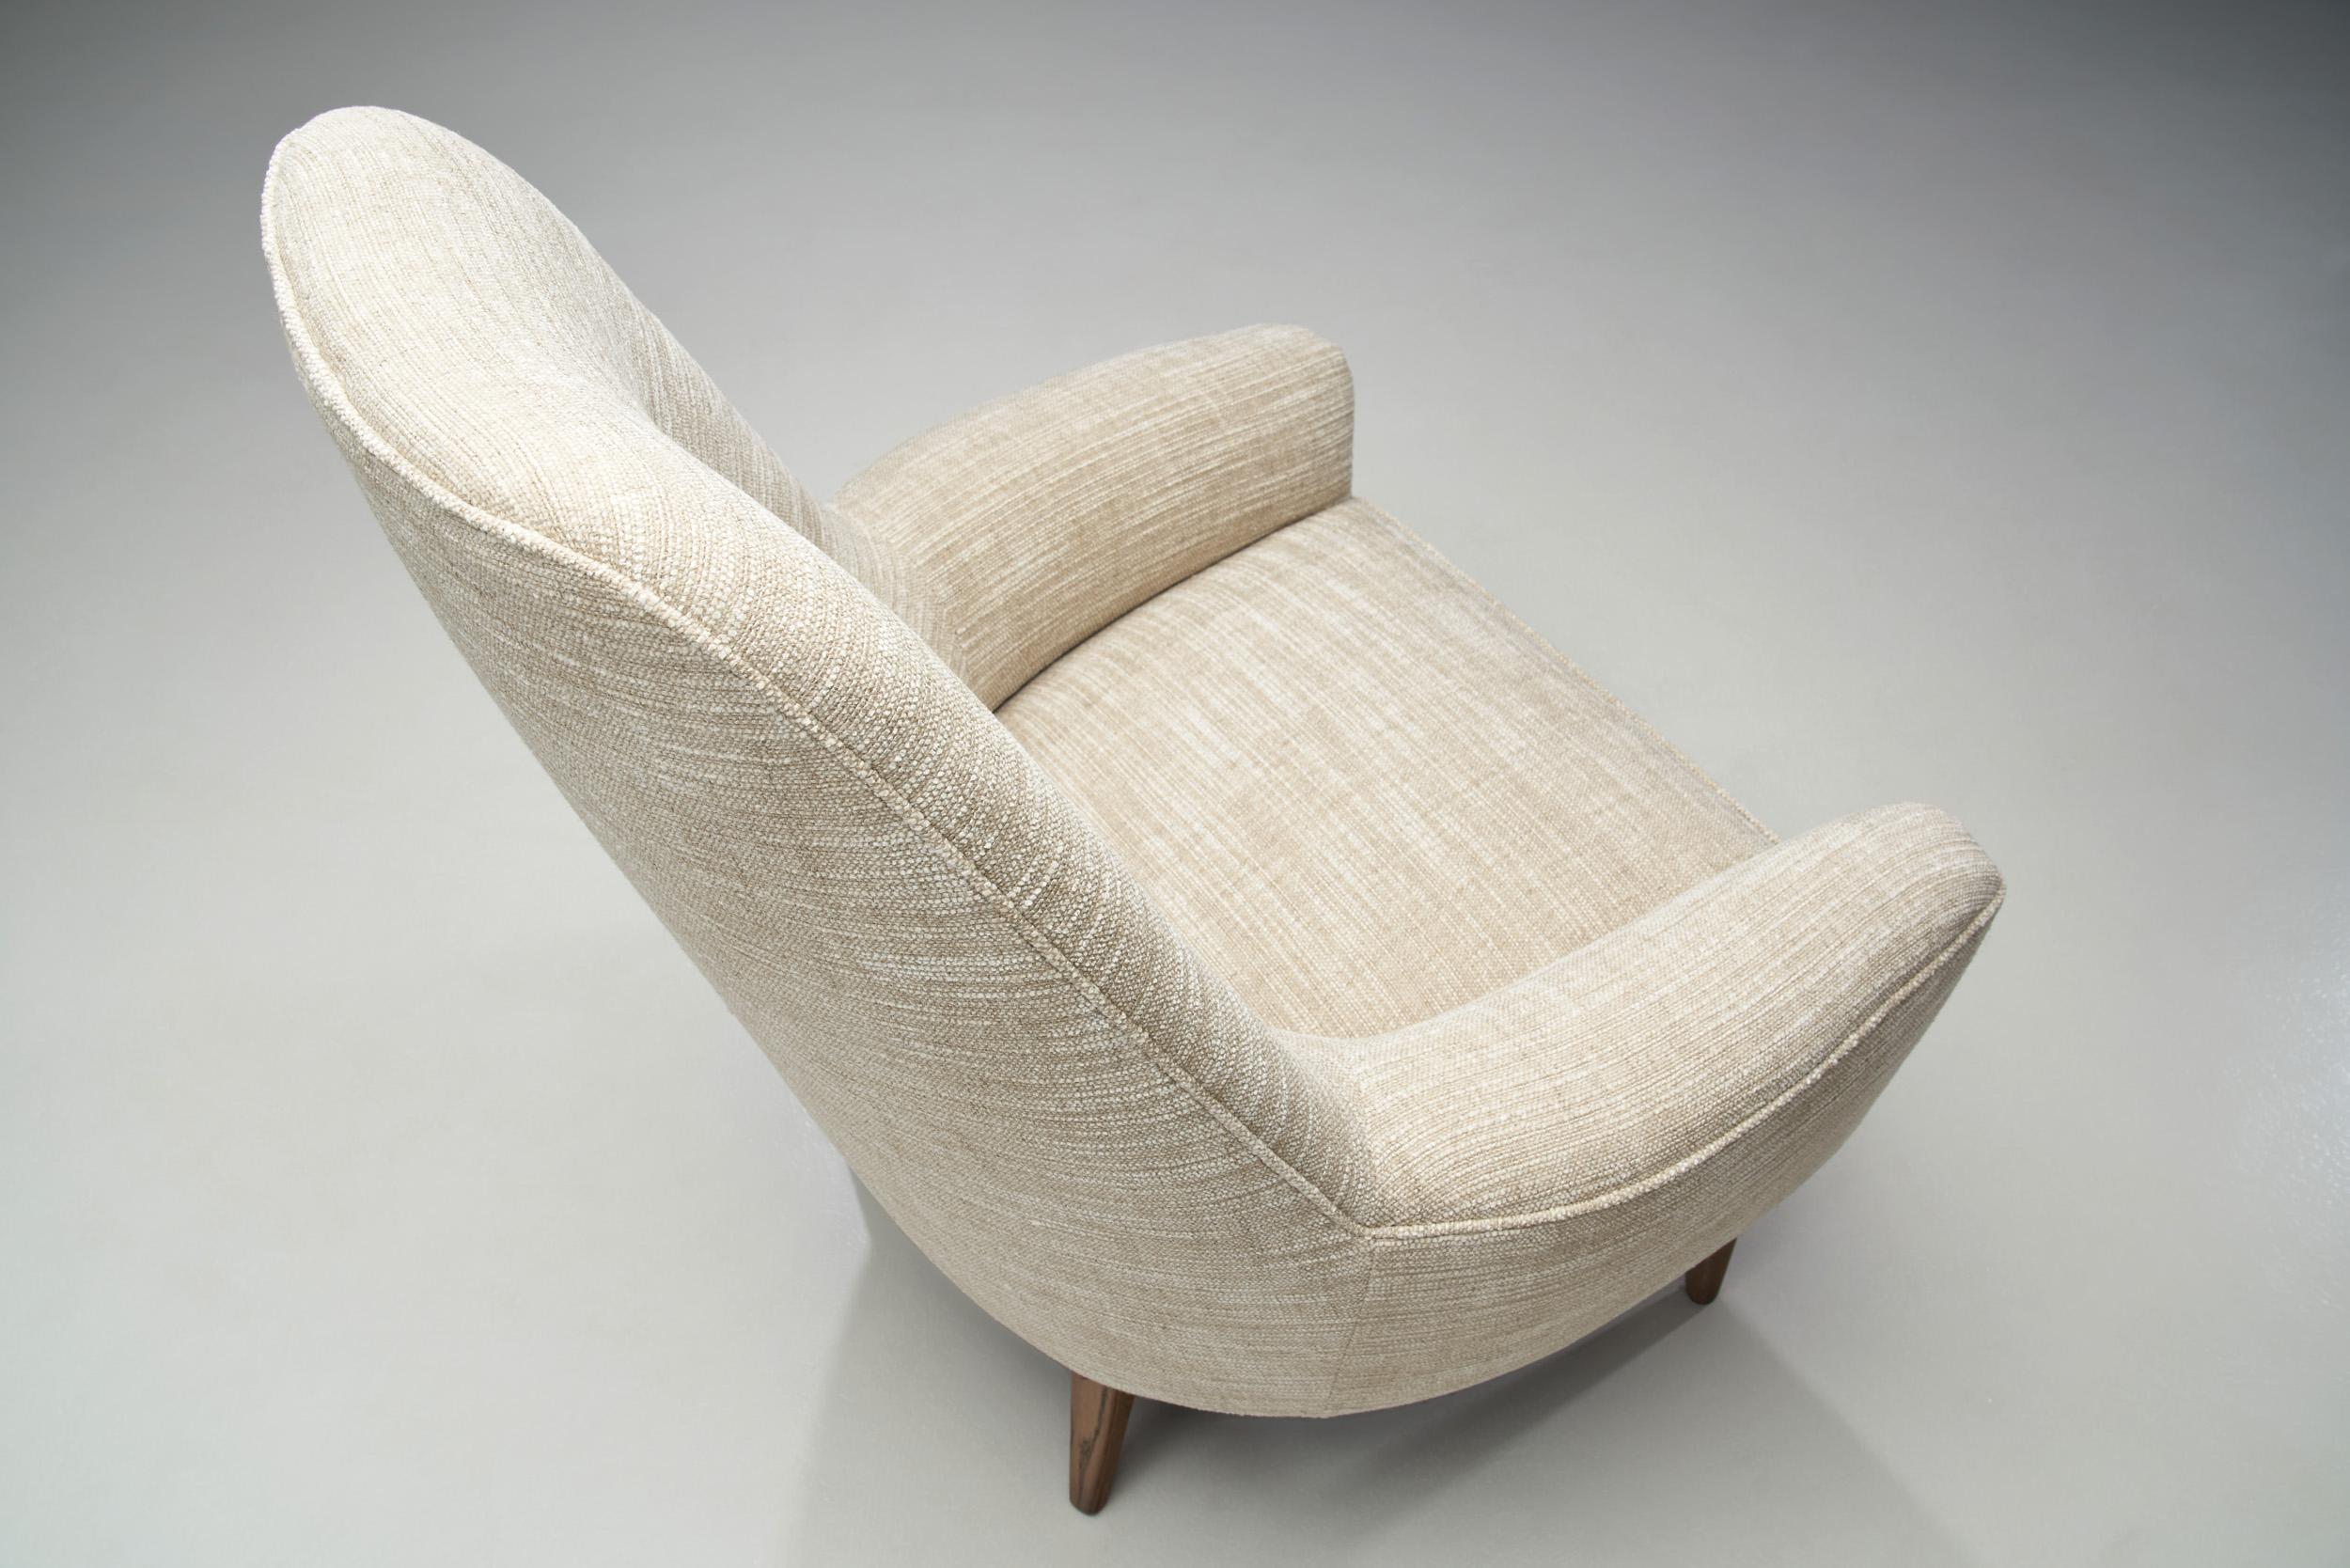 Swedish Modern Armchair with Tapered Wooden Legs, Sweden, 1950s For Sale 4